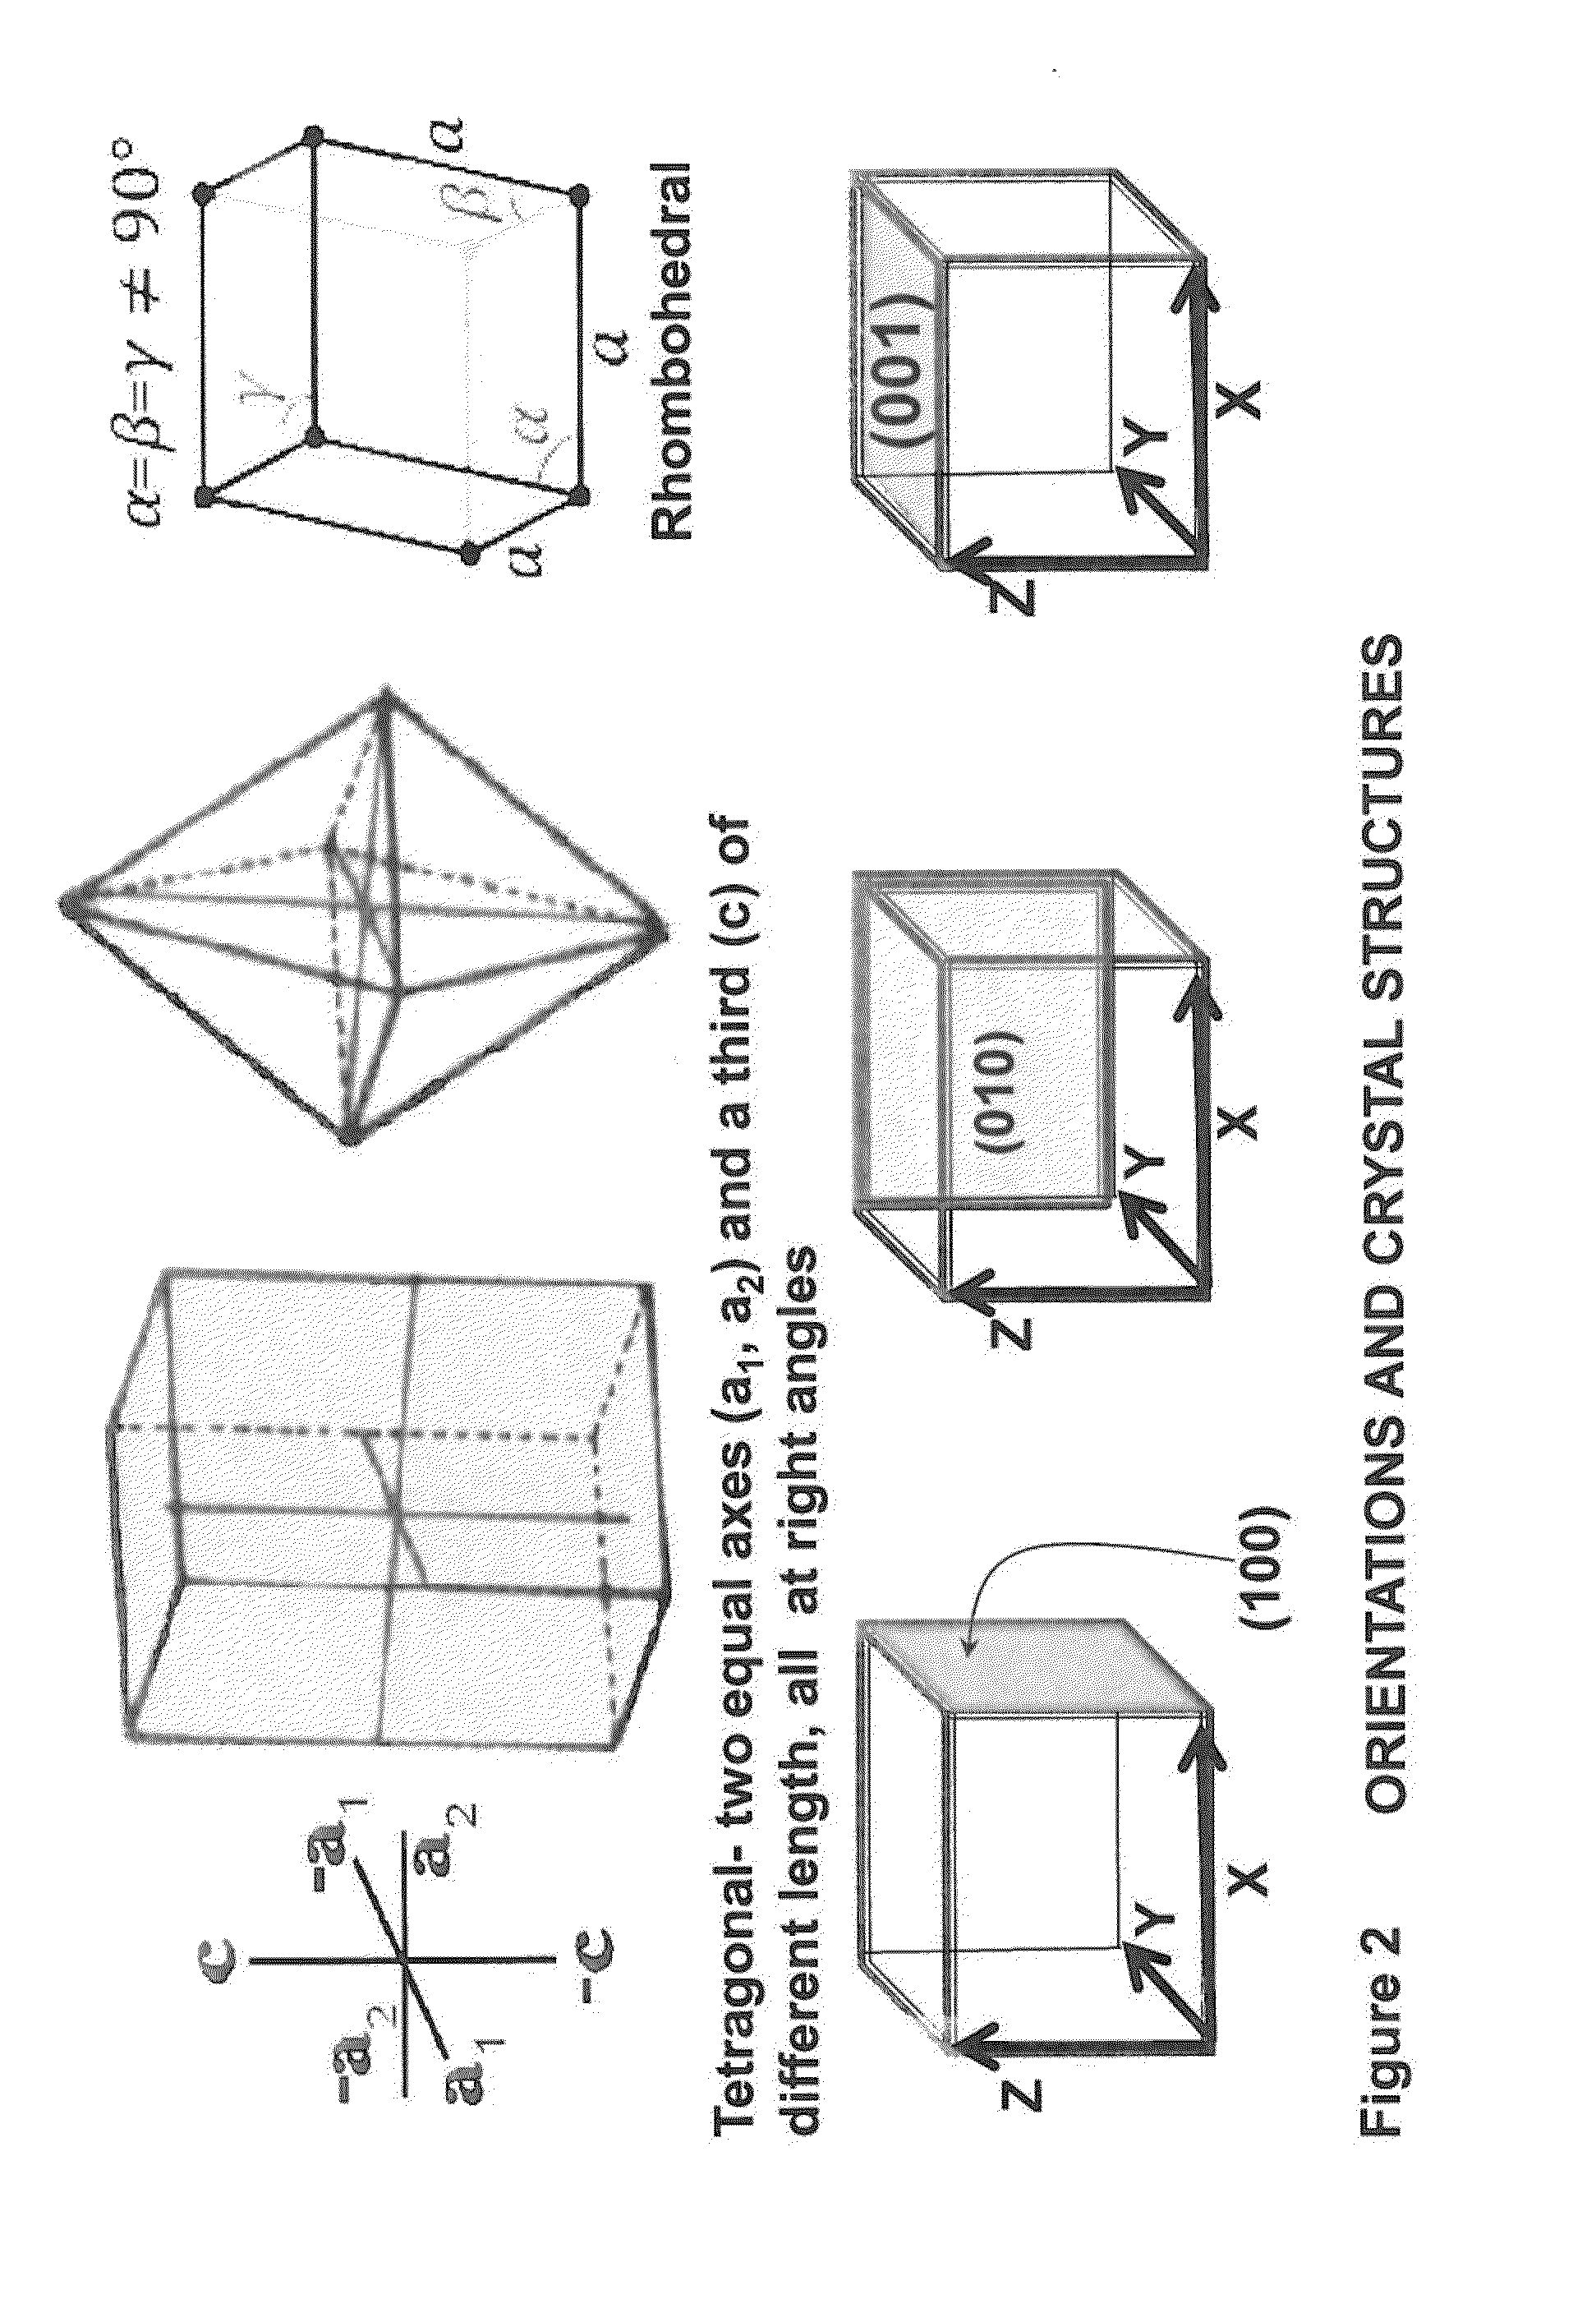 Stylo-Epitaxial Piezoelectric and Ferroelectric Devices and Method of Manufacturing